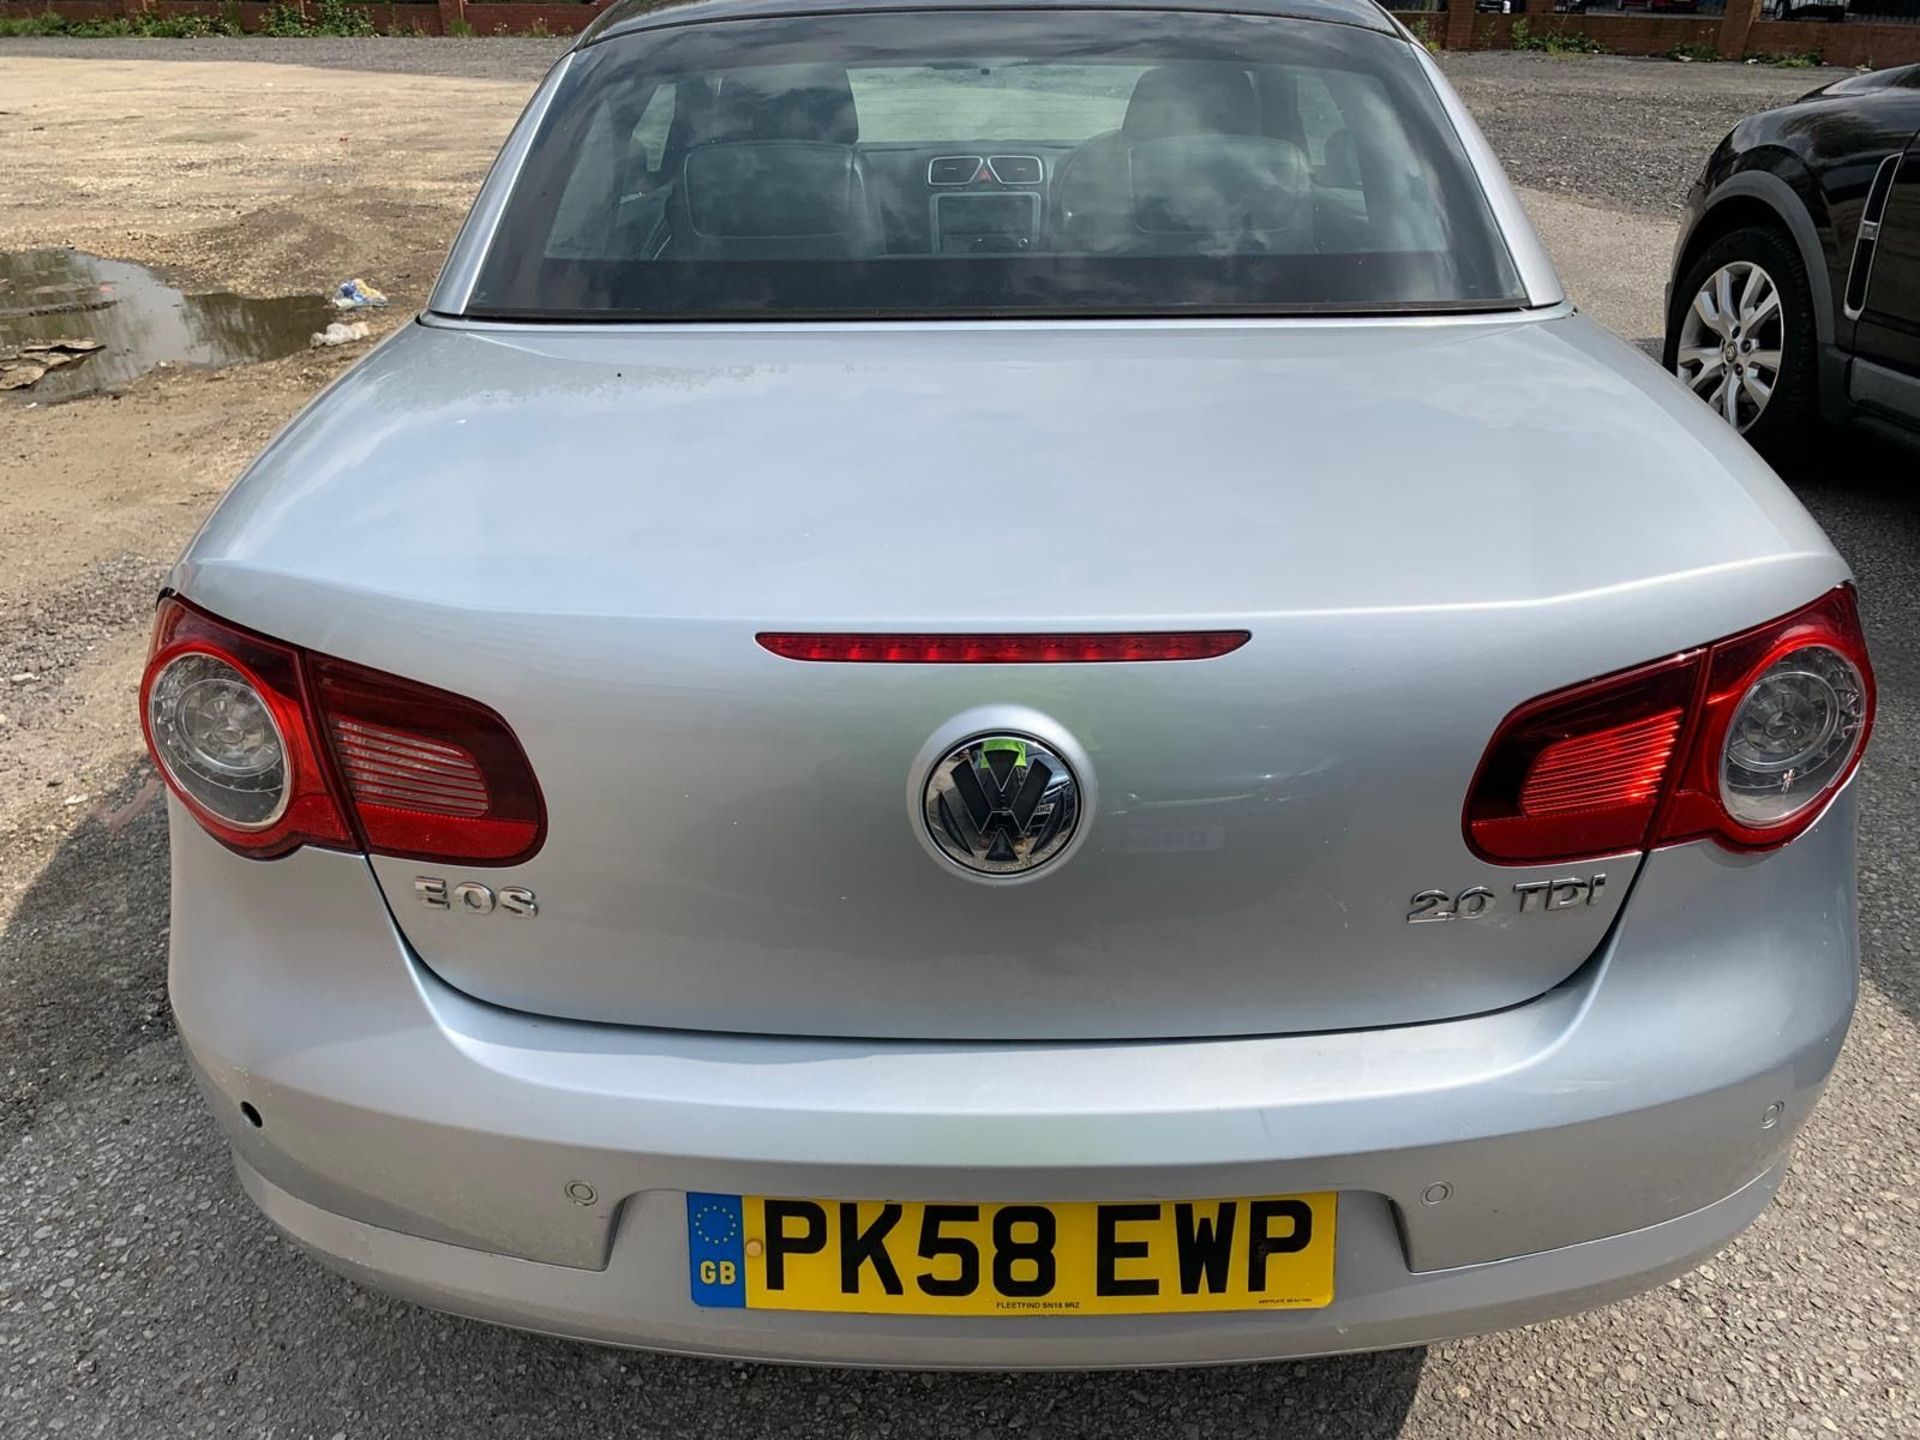 PK58 EWP VOLKSWAGEN EOS SILVER DIESEL MOT: 02.09.24 First Registration: 15.10.08 Number of services: - Image 4 of 10